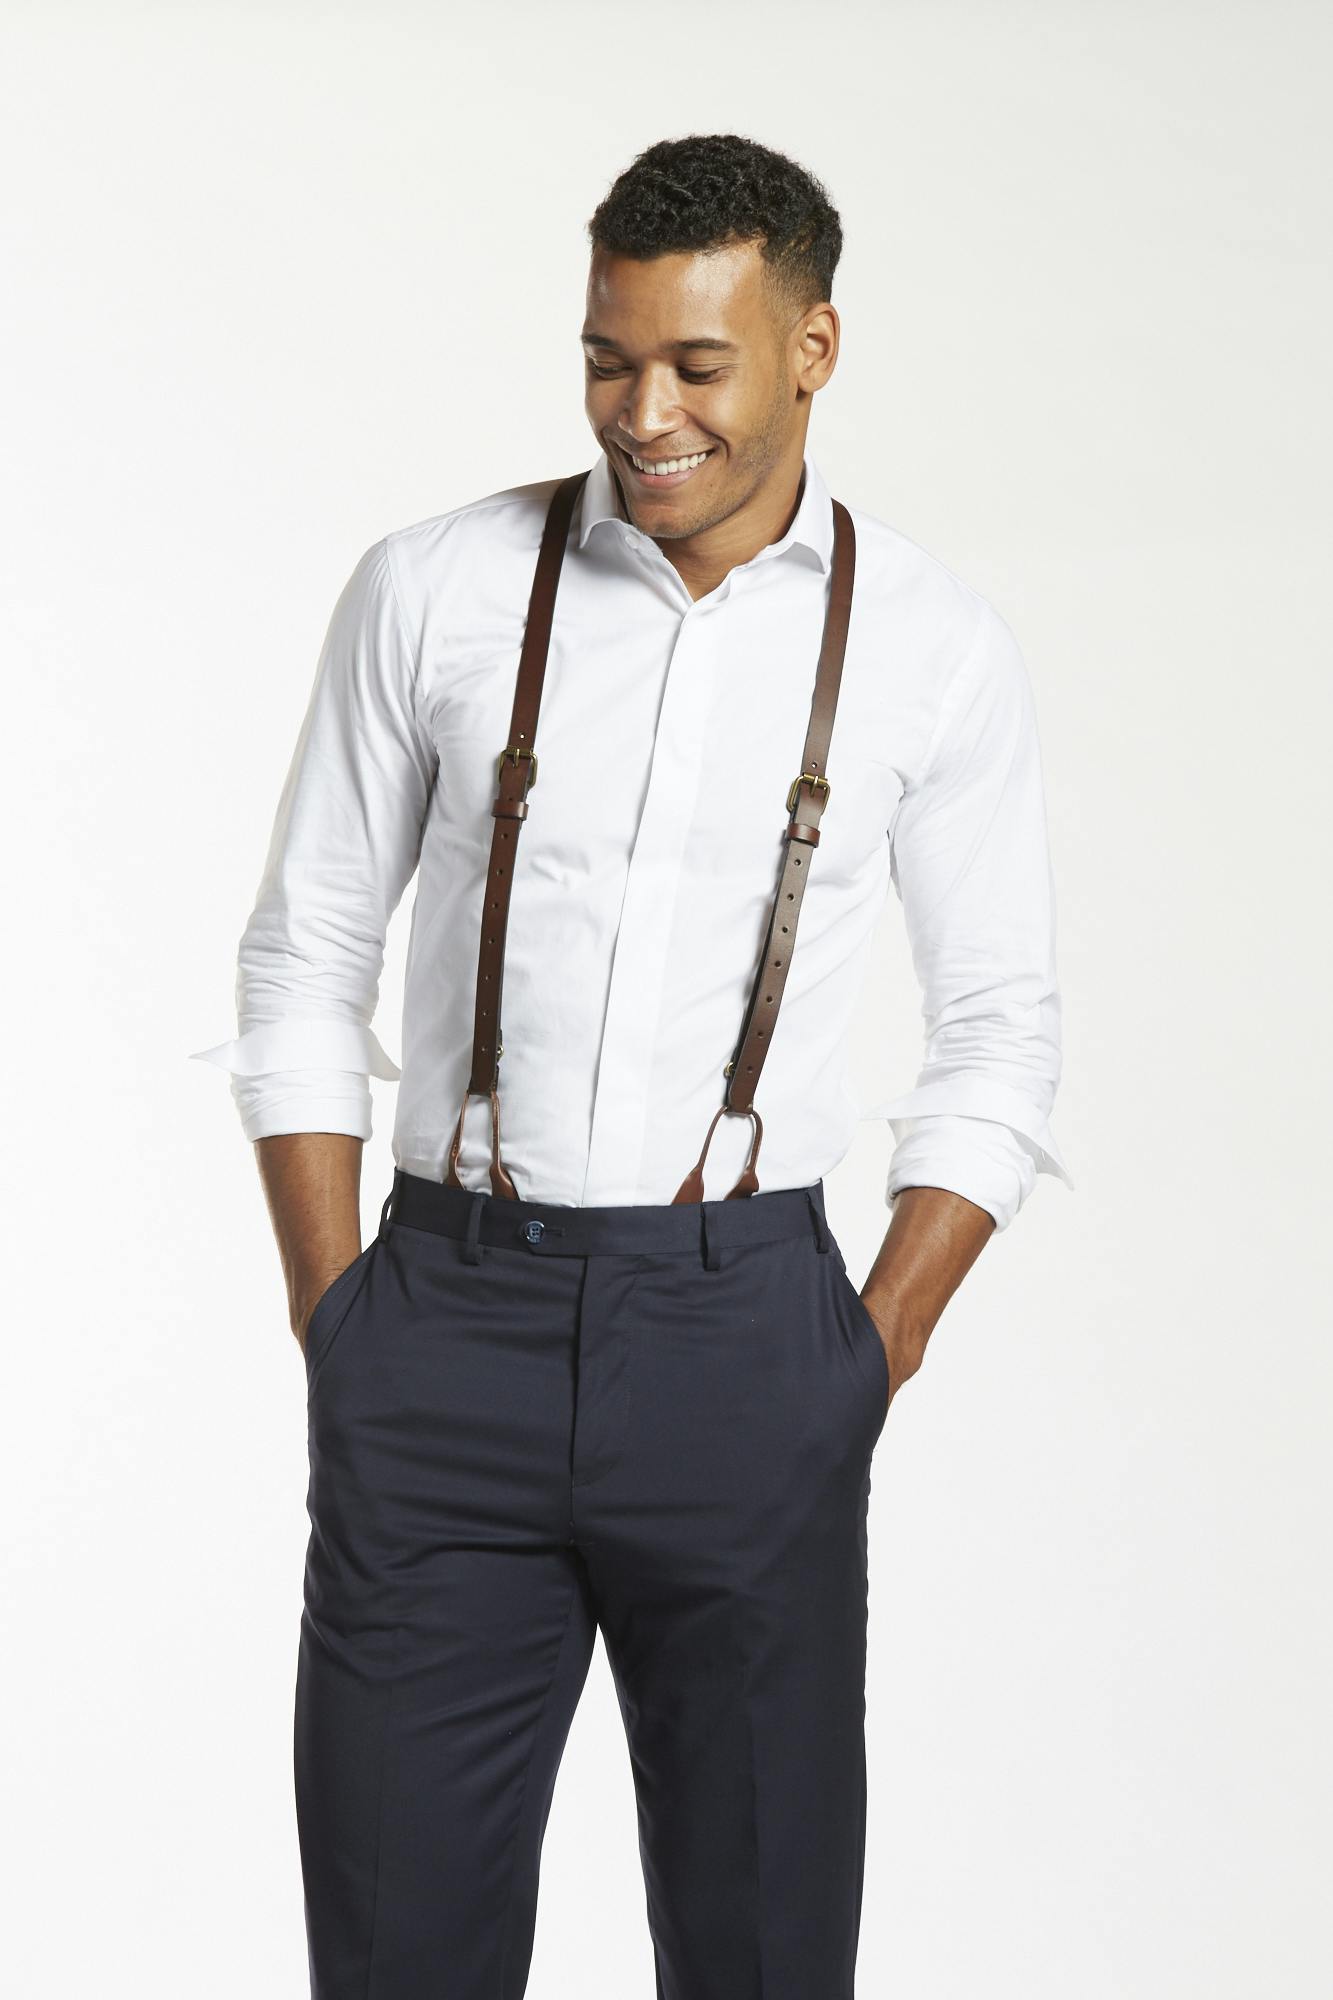 How To Properly Wear Suspenders - Buying Trouser Braces For Men